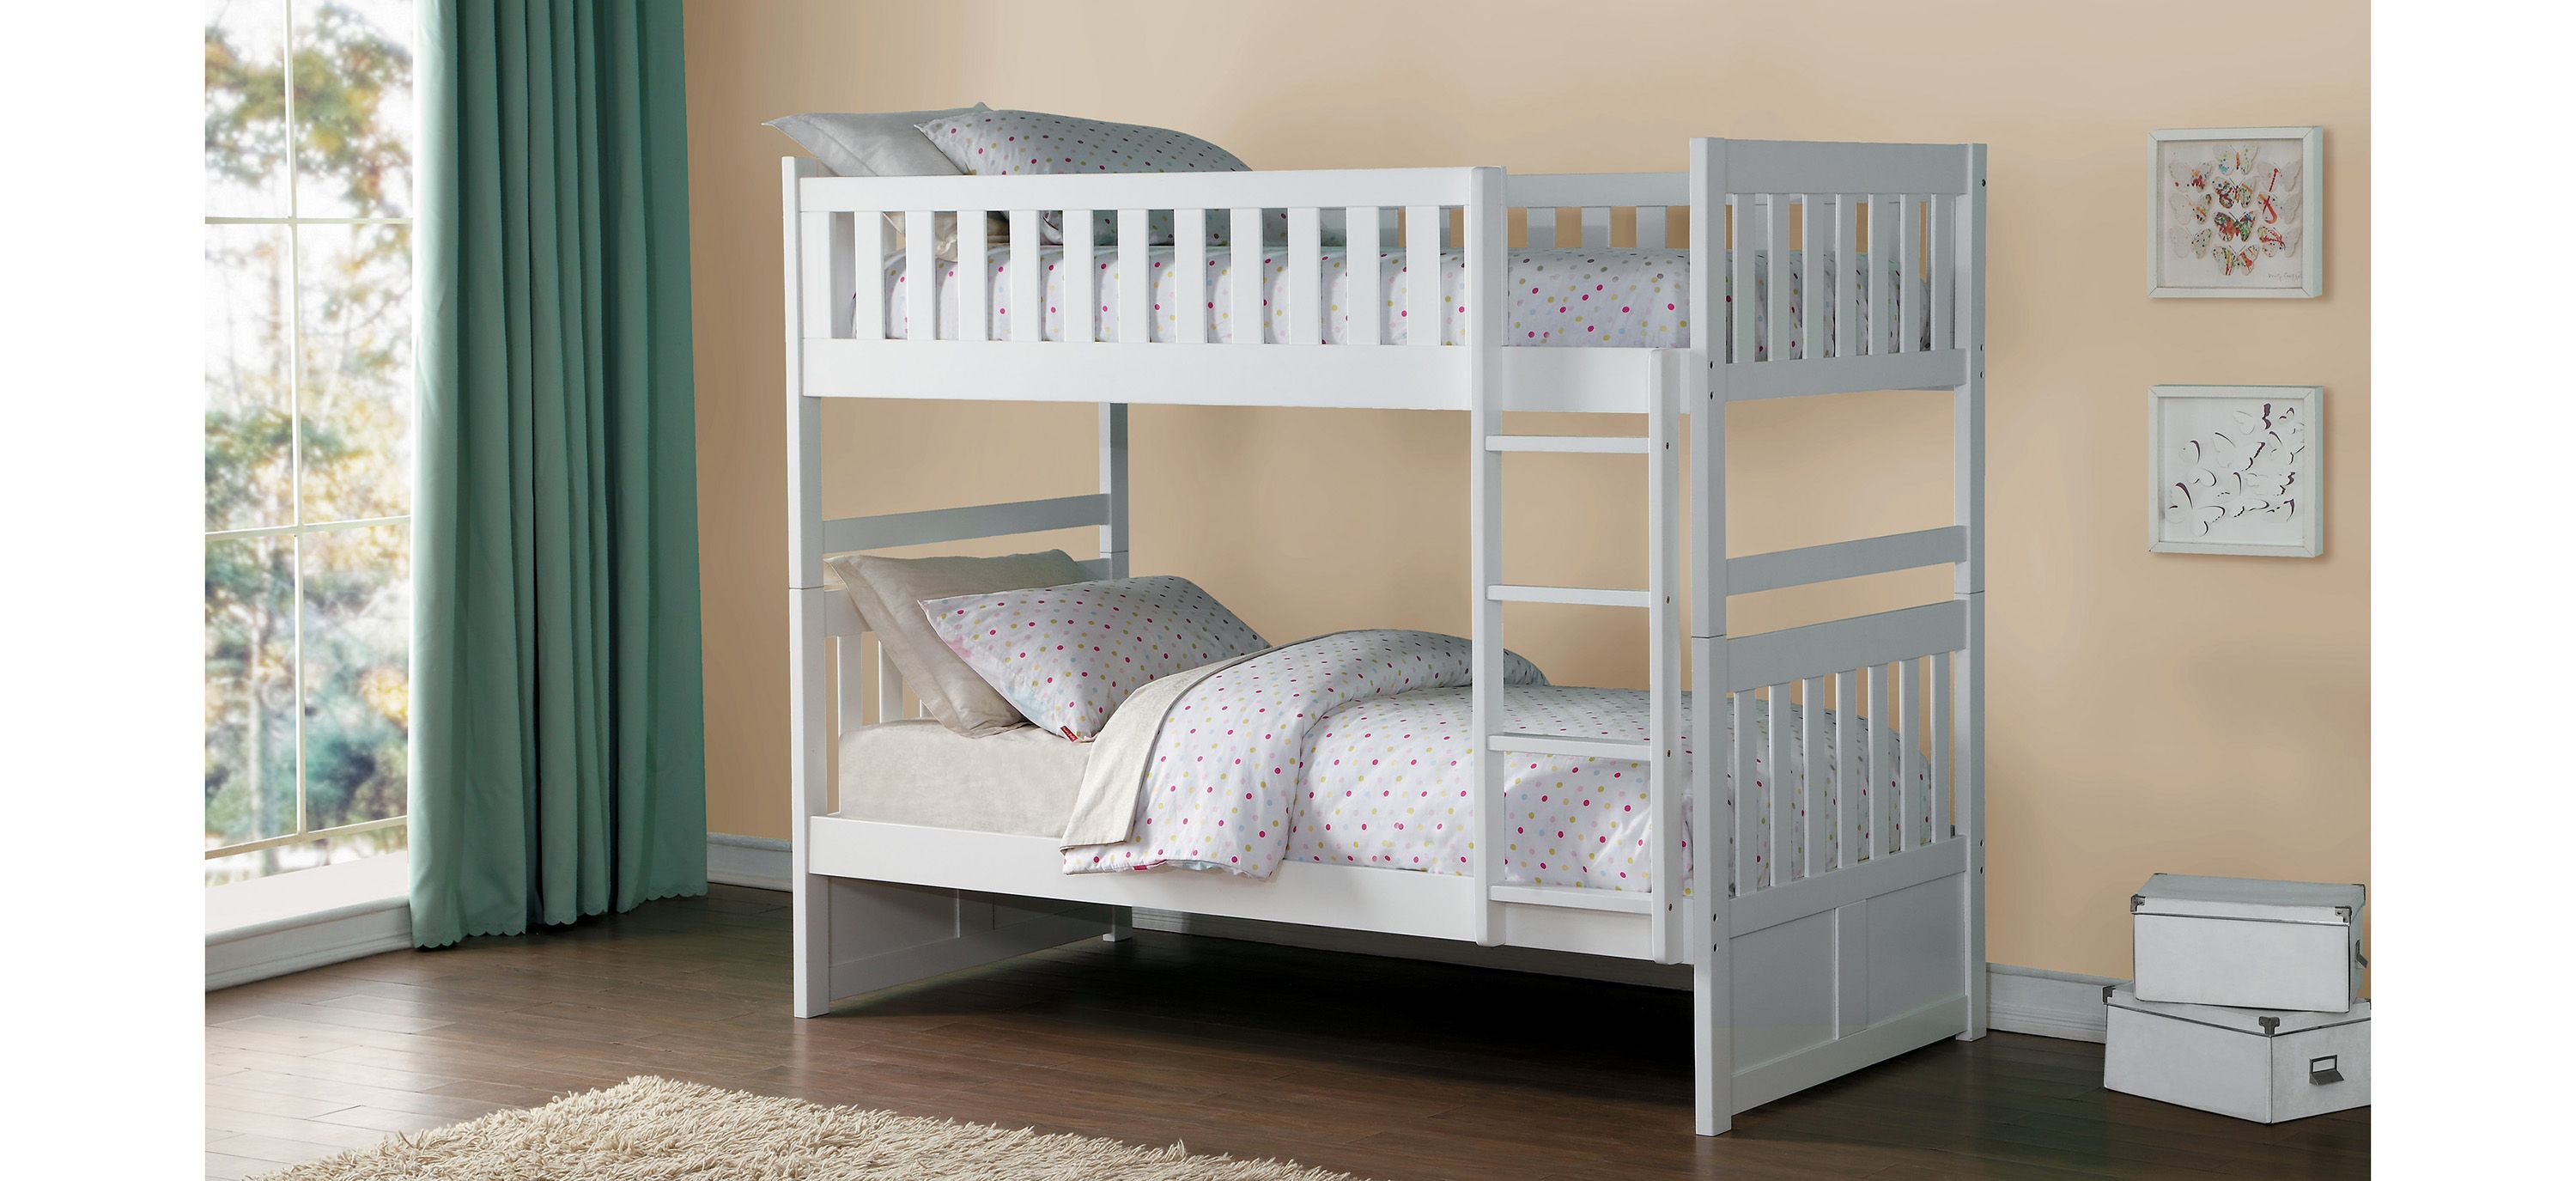 raymour and flanigan bunk beds